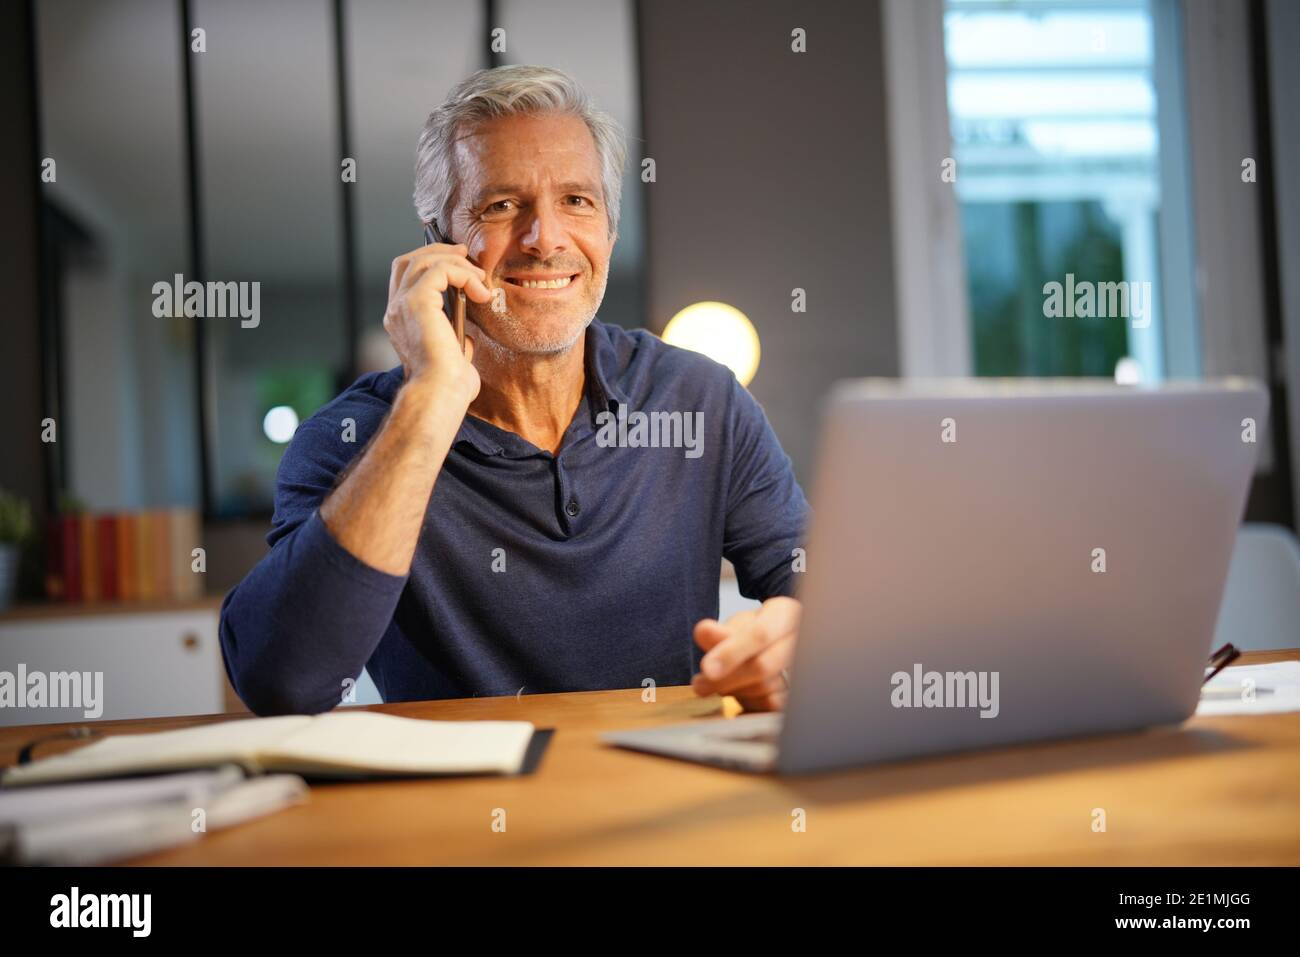 Portrait of senior man with grey hair connected with laptop Stock Photo